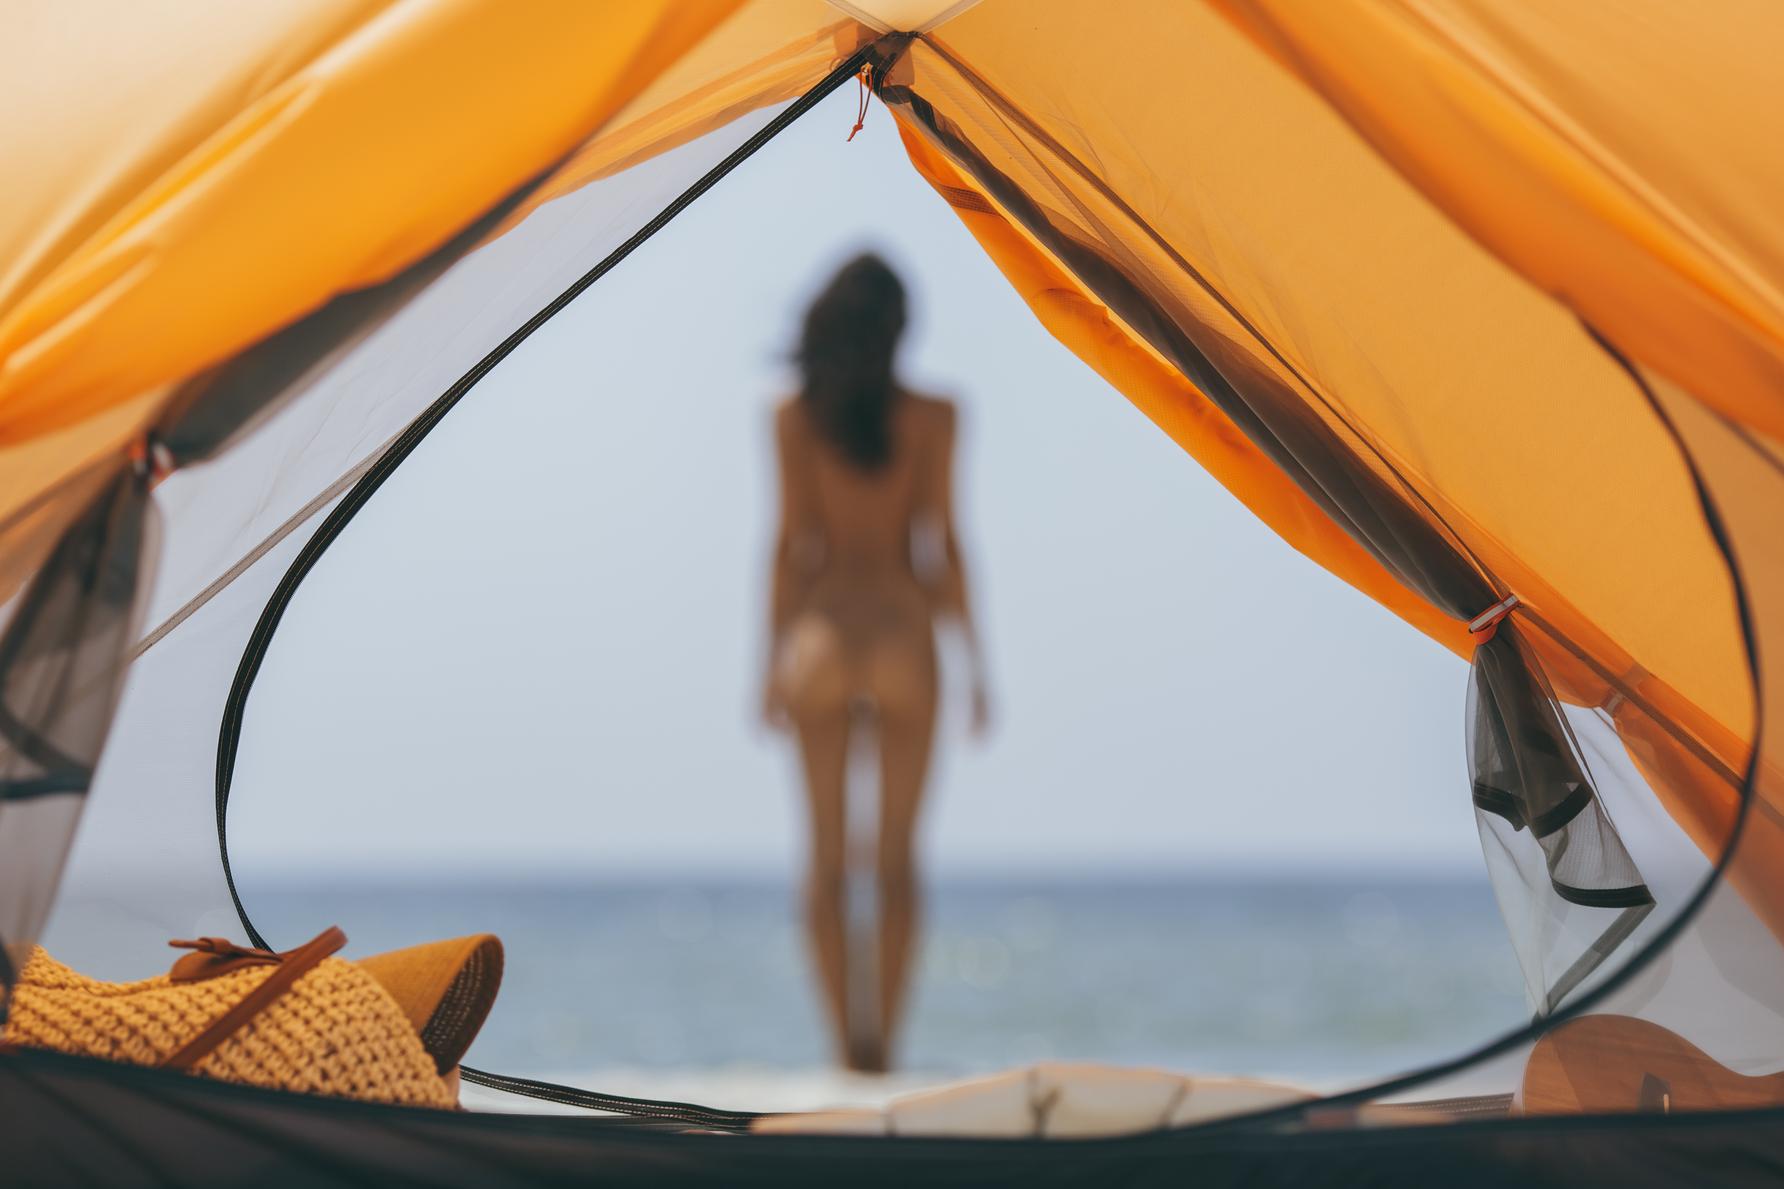 Naked-Woman-on-the-Beach-with-a-Tent.